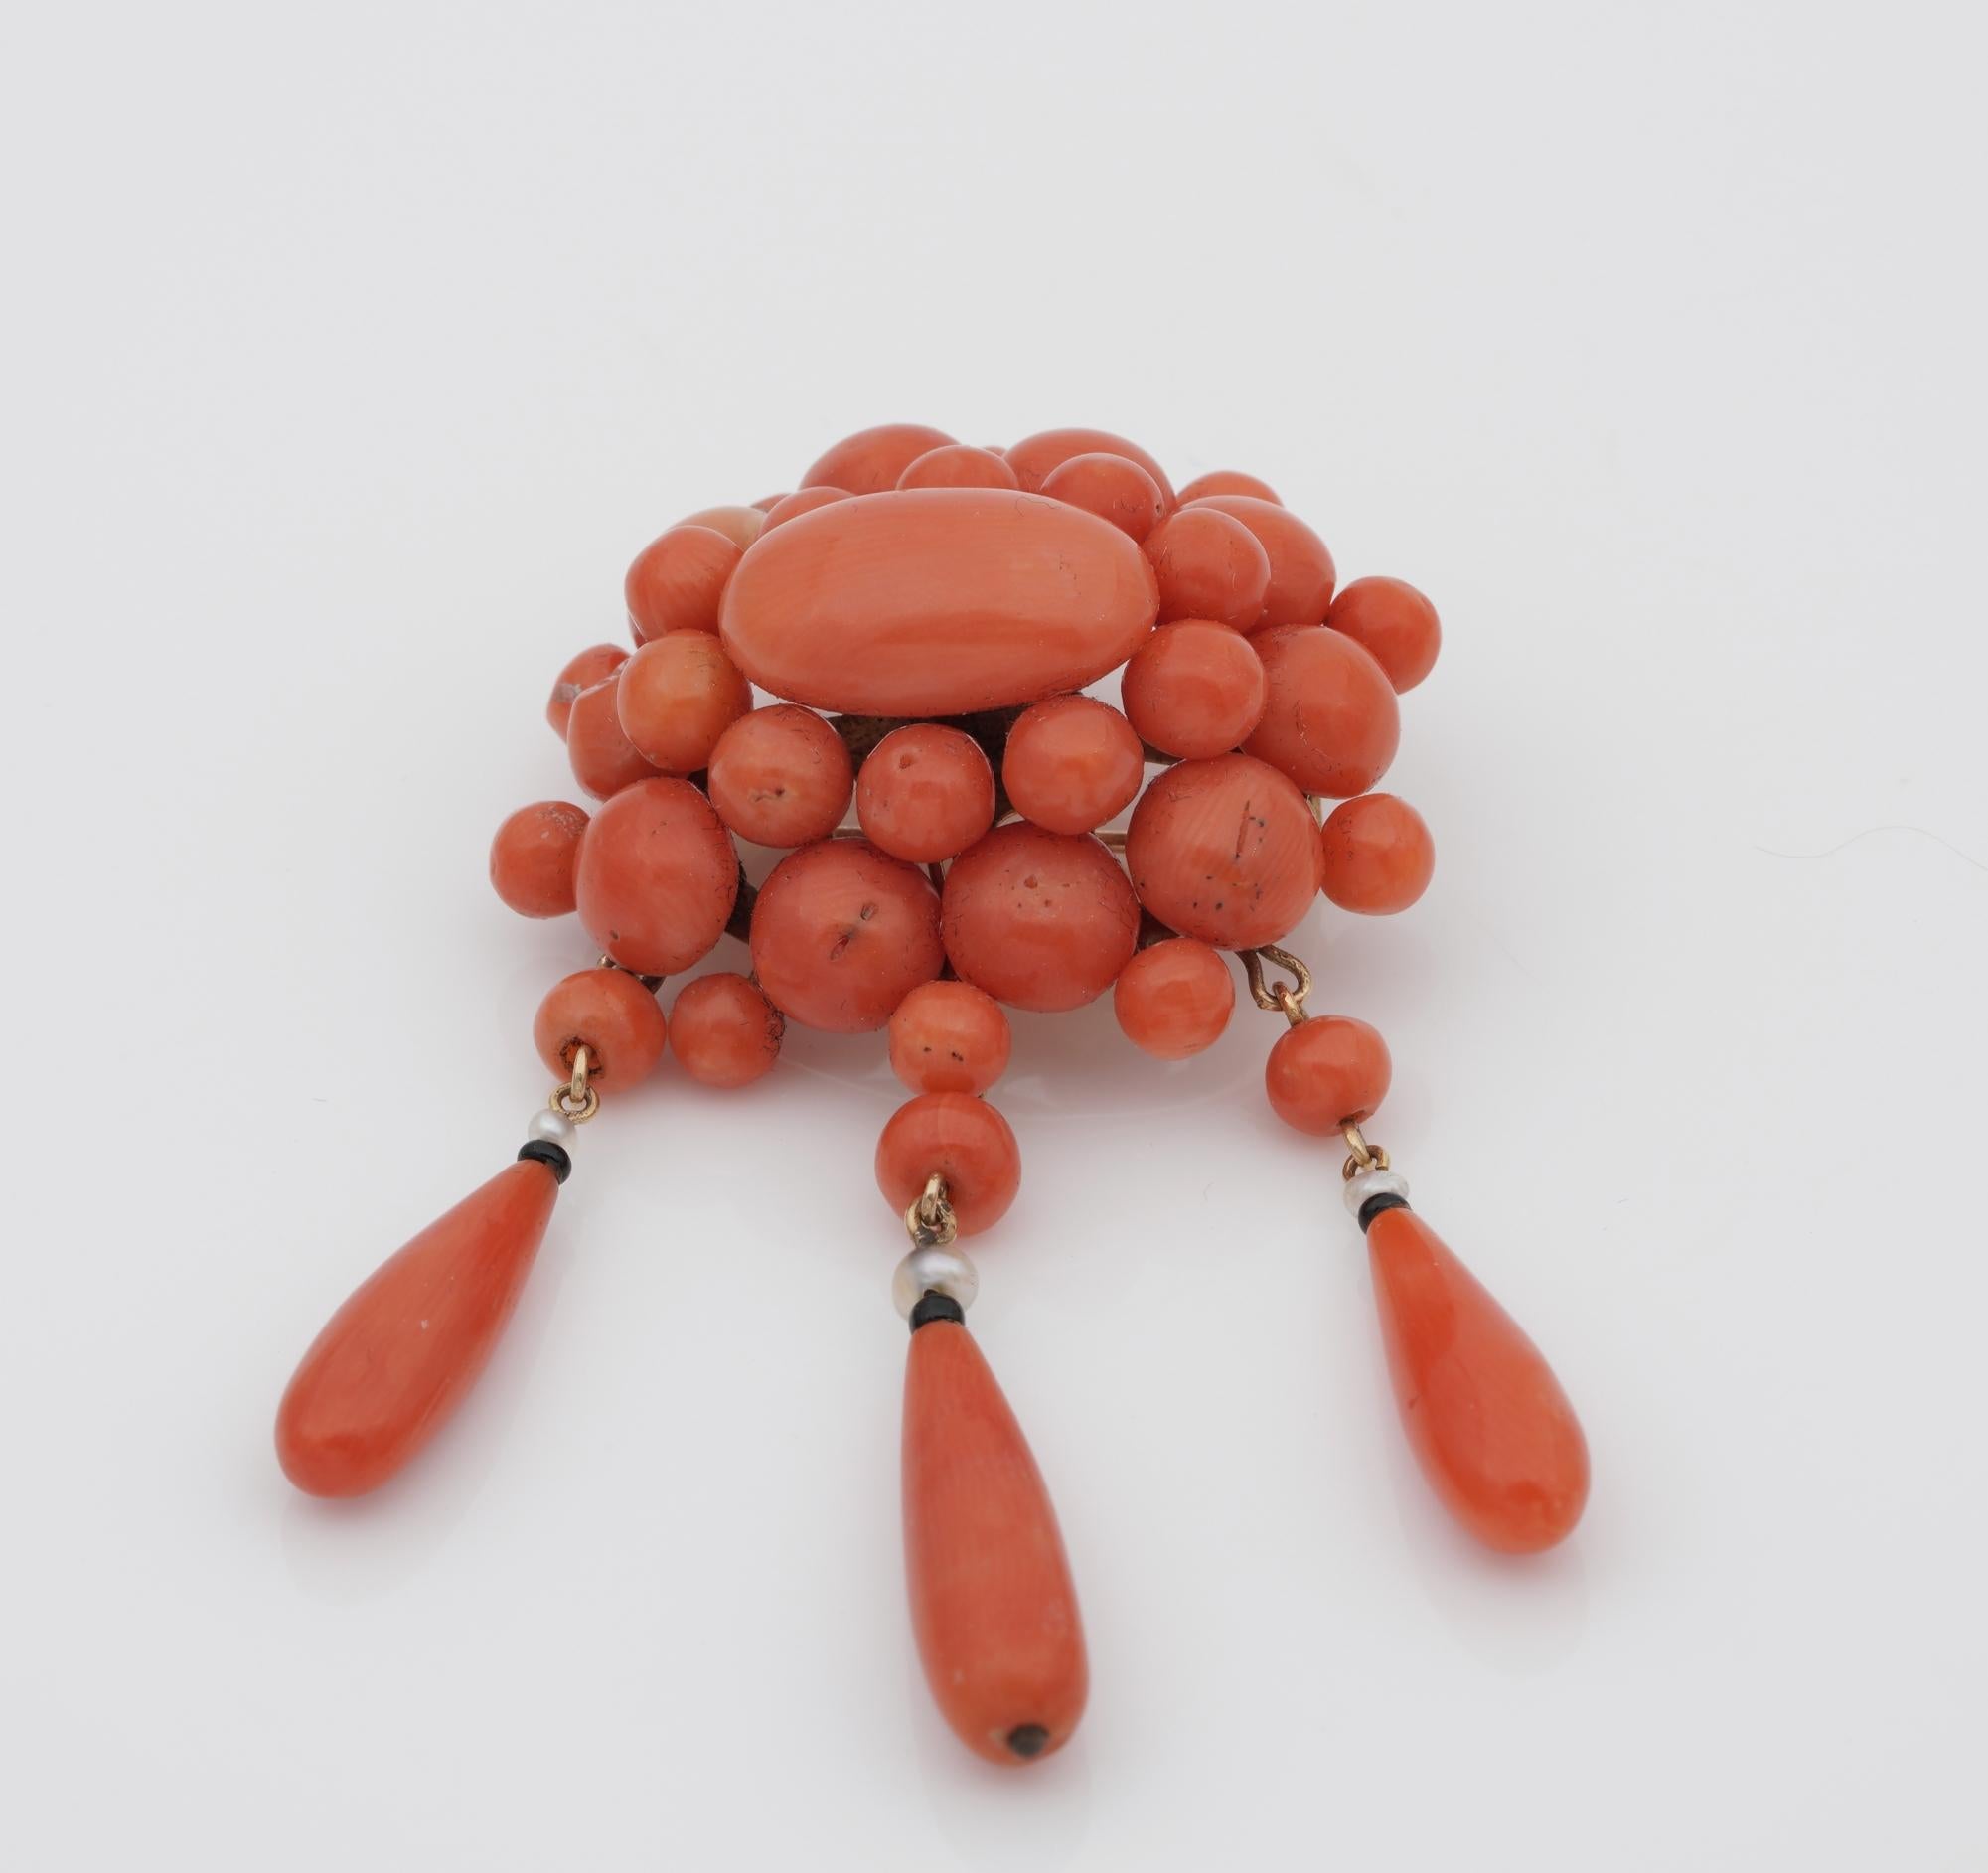 Coral Treasures
Beautiful antique Coral treasure to cherish
The ageless allure of antique Coral is even more sought after with the time passing by
This beautiful French example is pre 1850 bearing eagle’s head of the period standing for 18 KT gold